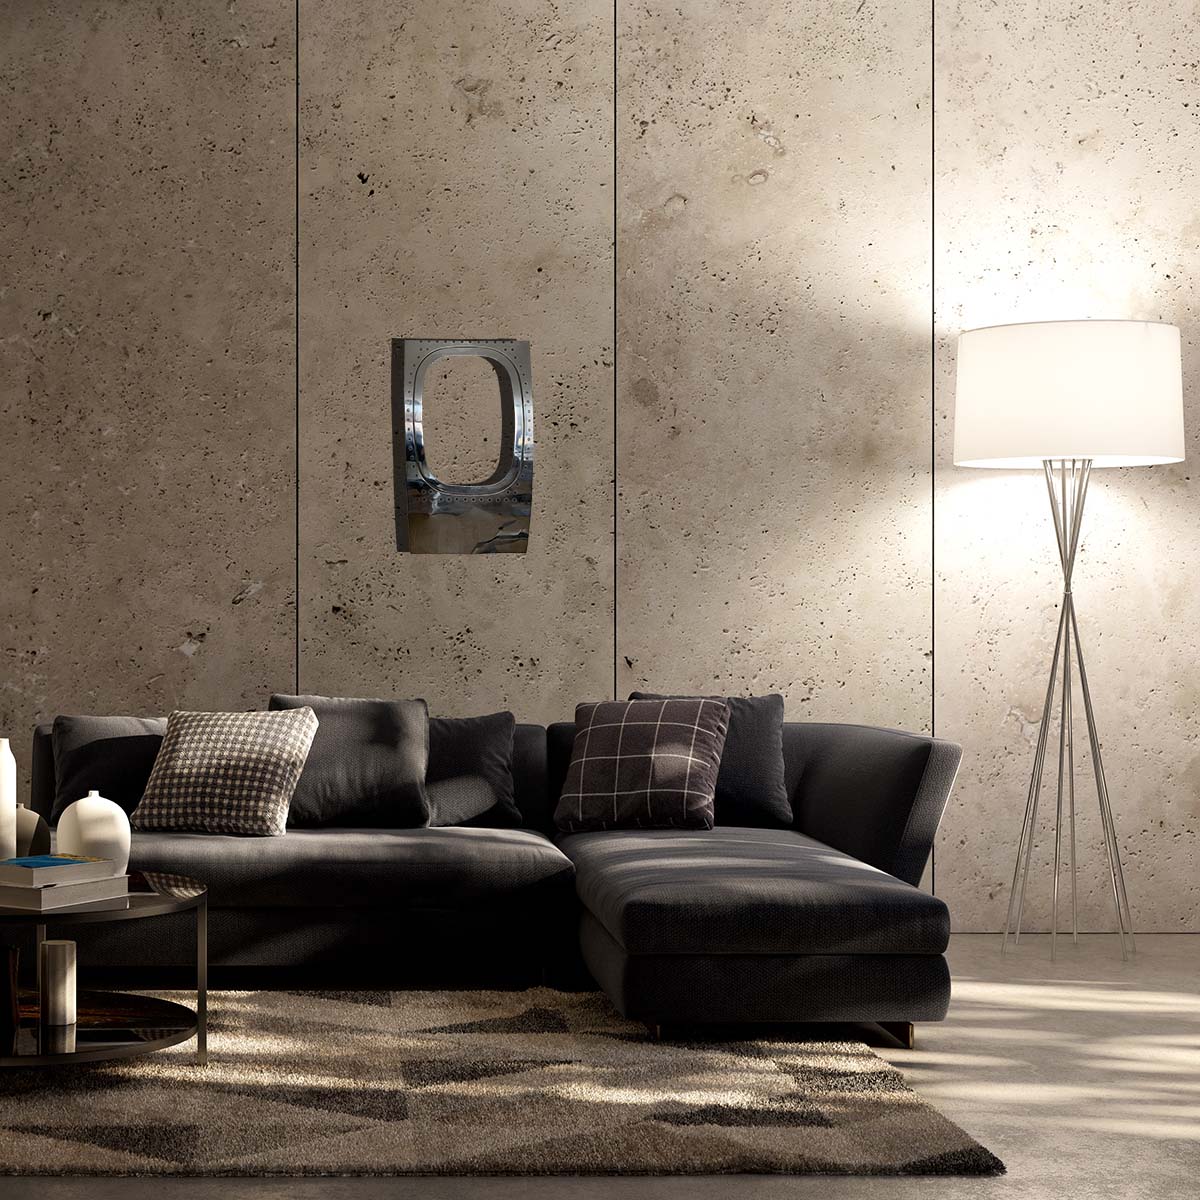 Polished ATR42 Window, for sale, in a contemporary living room.